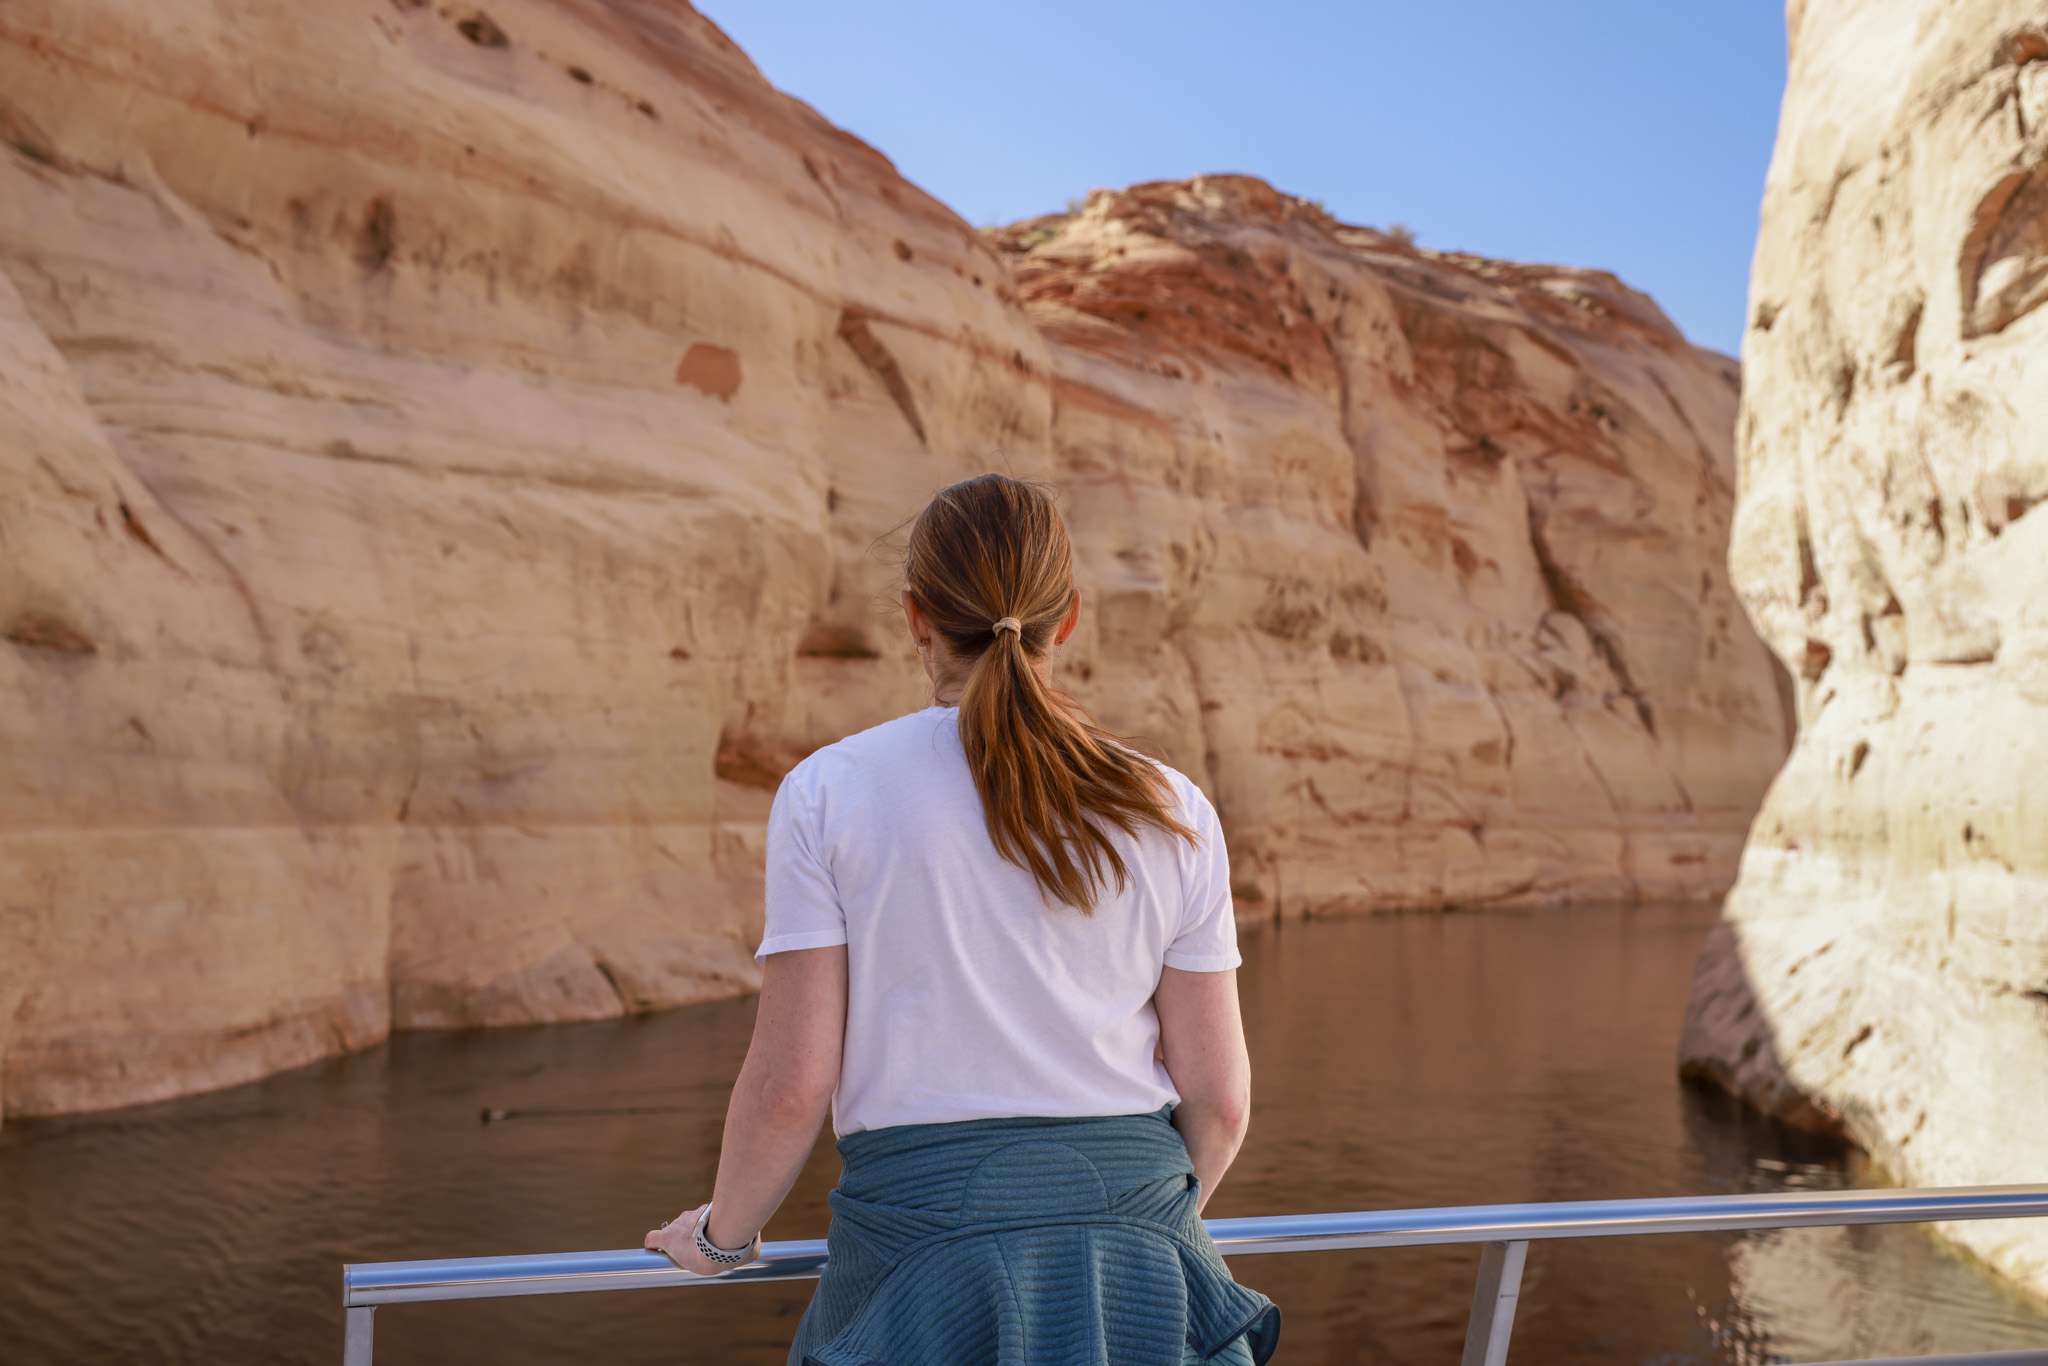 A 48-hour Solo Trip to Page, Arizona Was Exactly the Getaway This Mom Needed